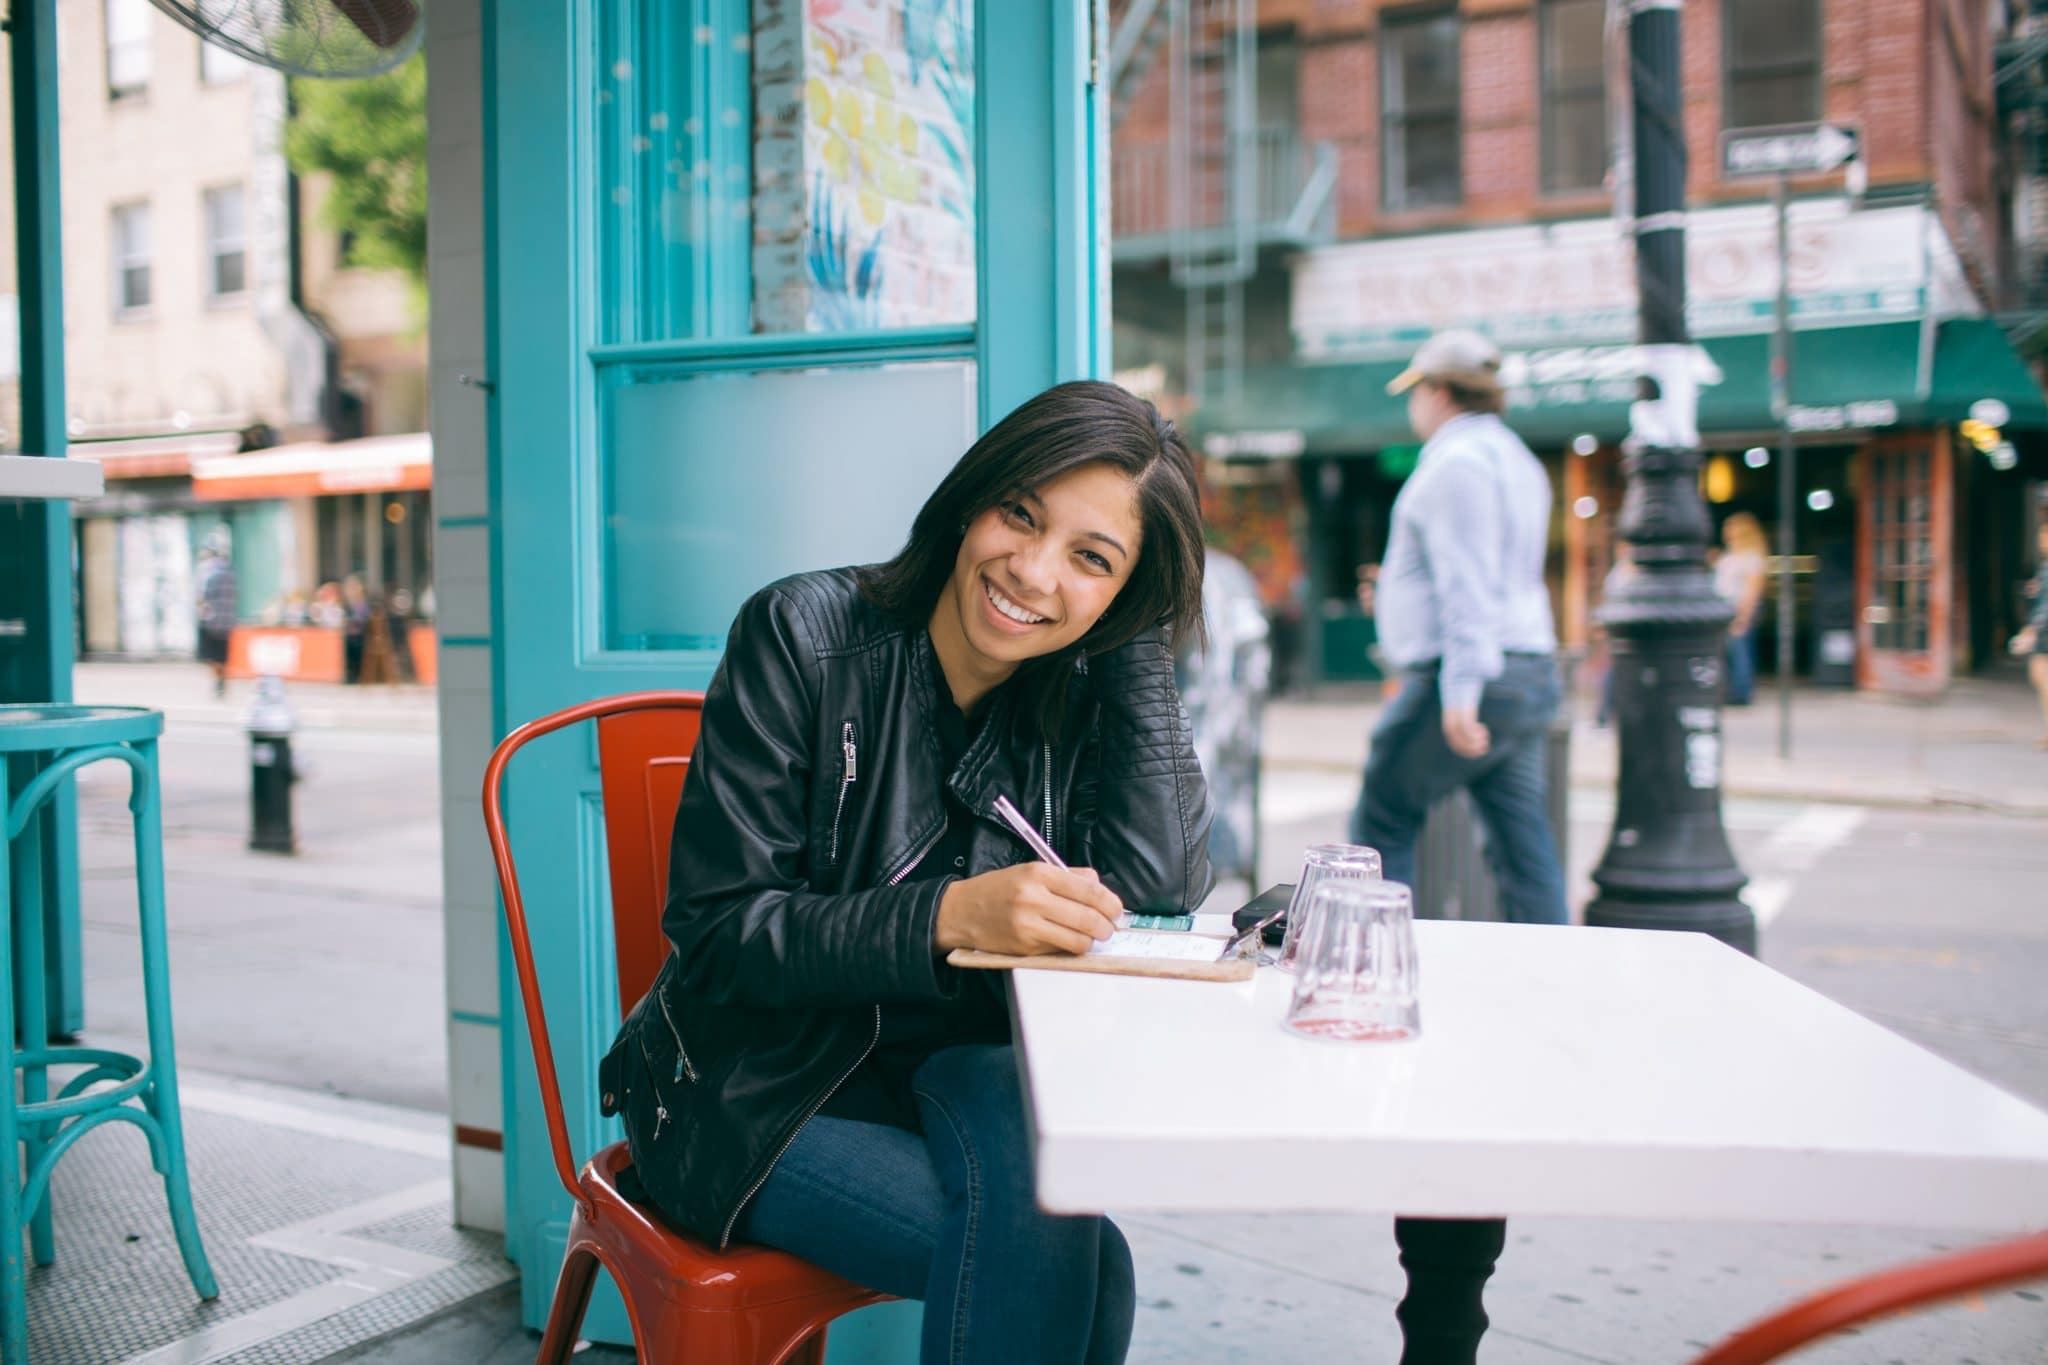 Woman sitting at a table smiling and writing in a notebook